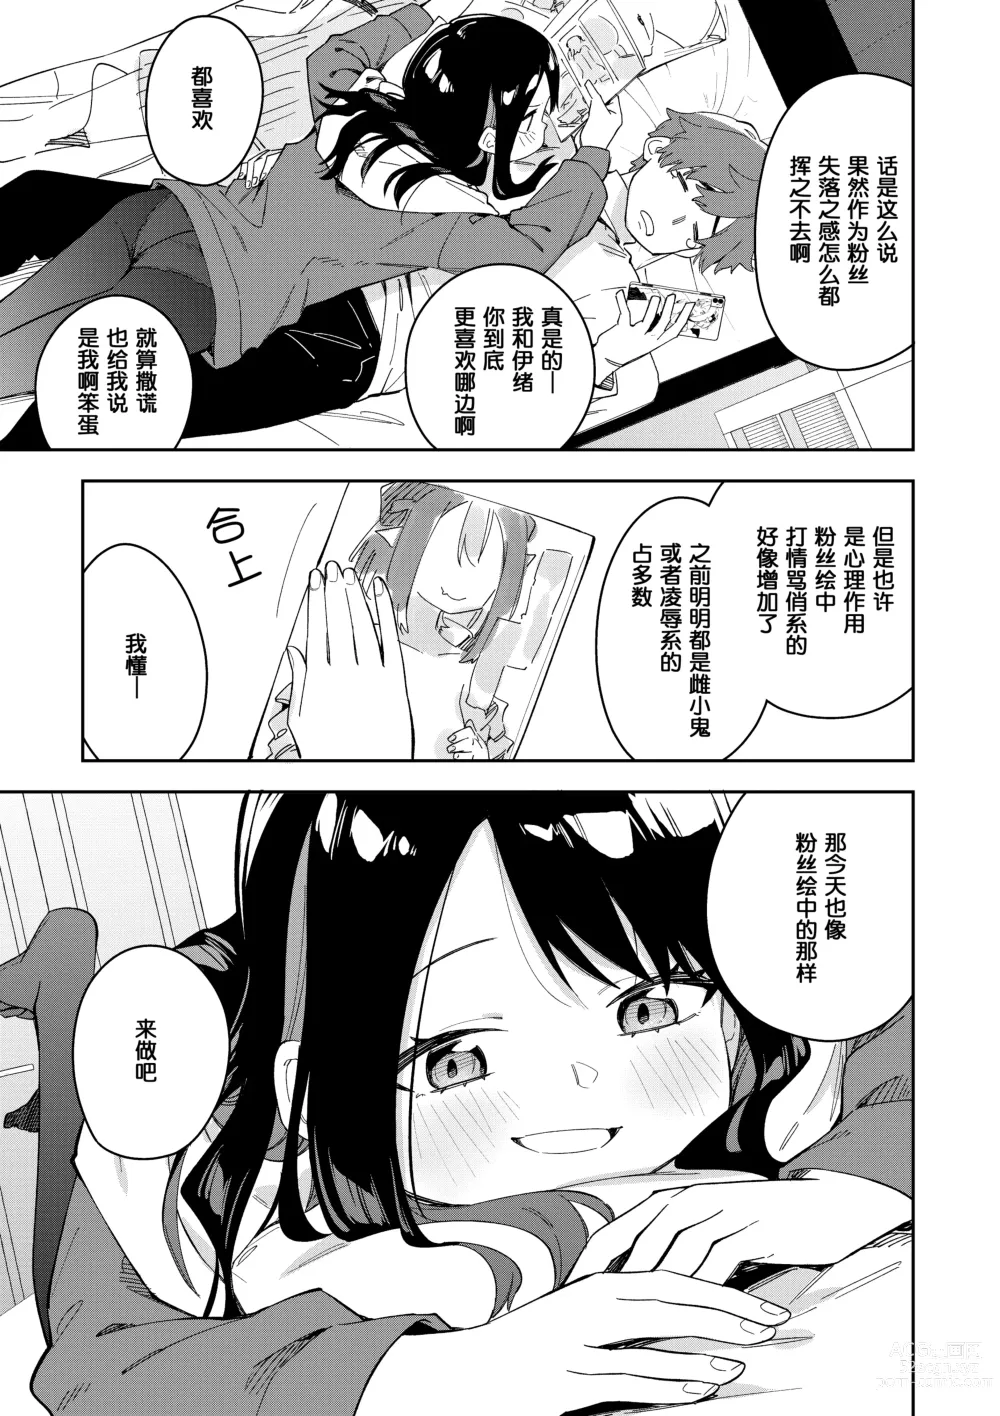 Page 41 of doujinshi 隣人は有名配信者3人目